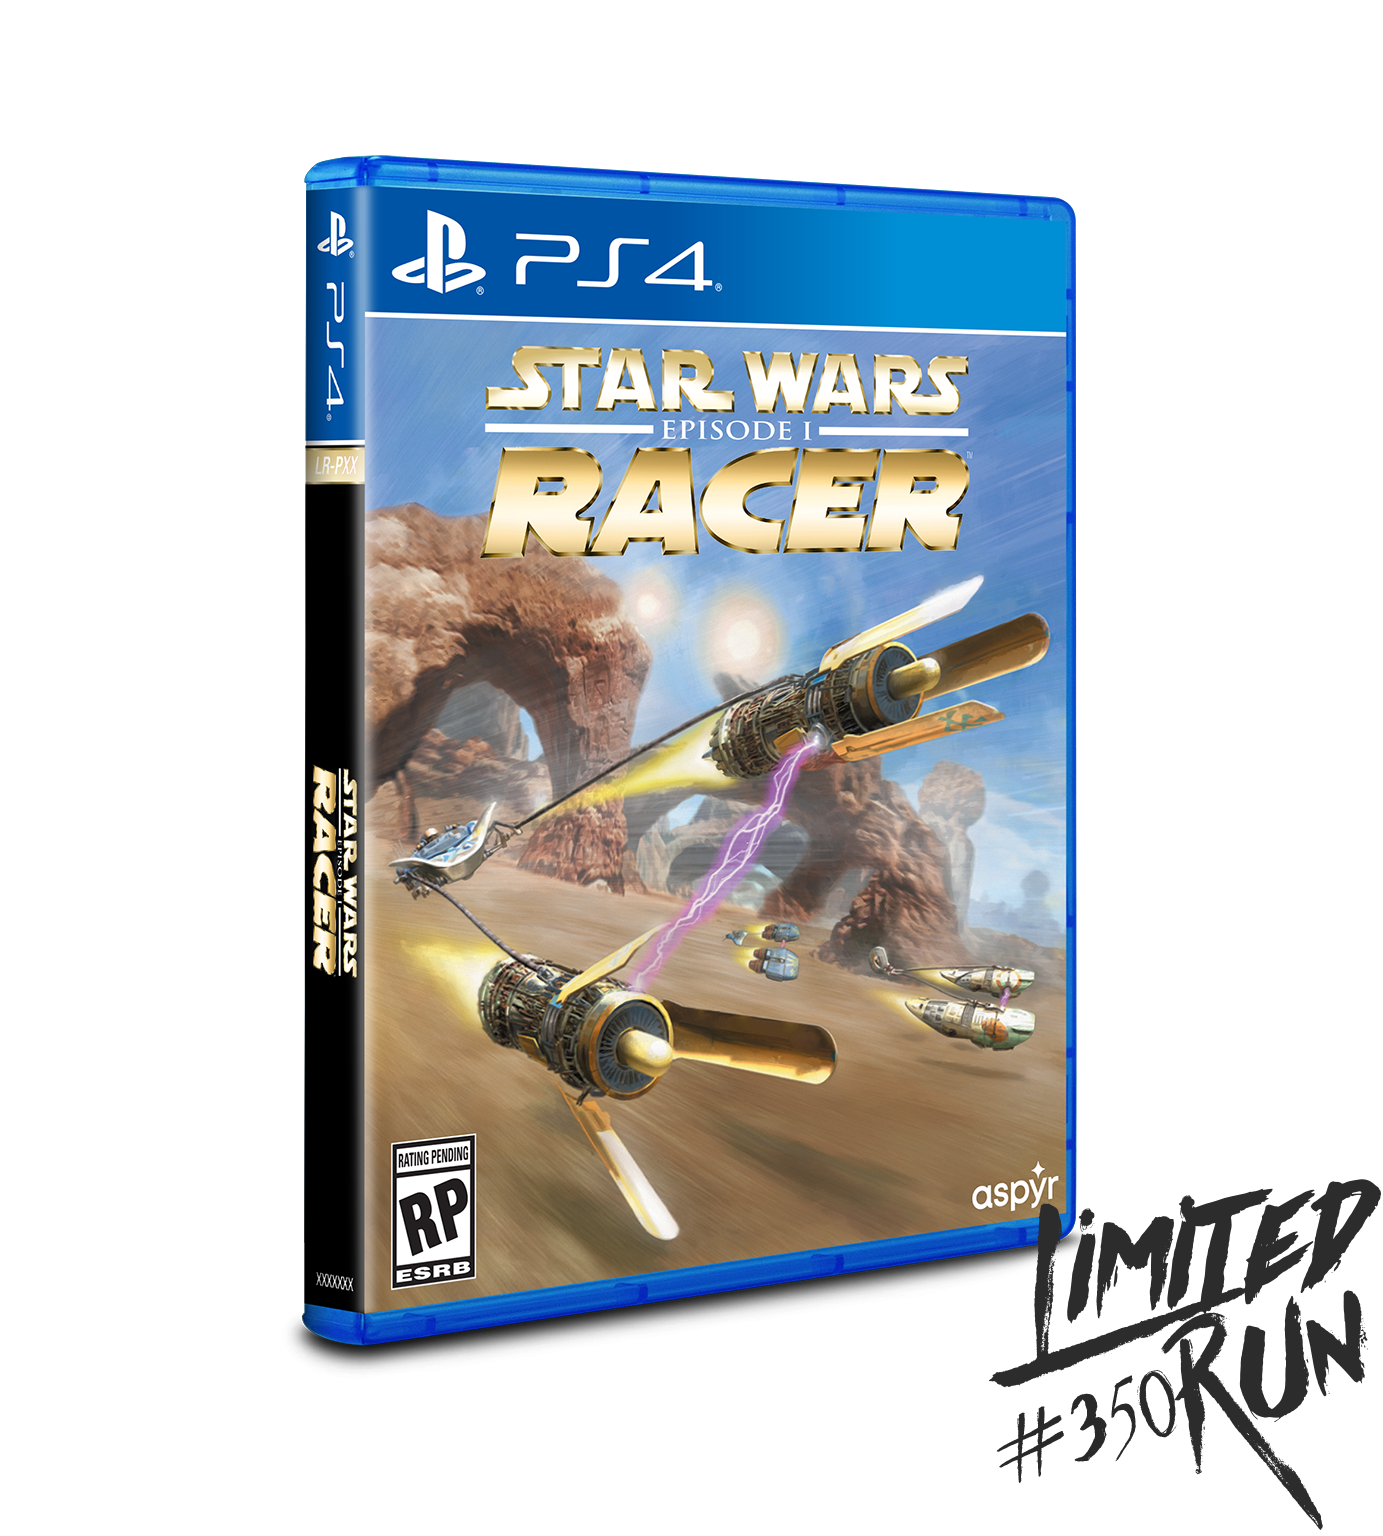 Limited Run 350 Star Wars Episode I Racer Ps4 Preorder Limited Run Games